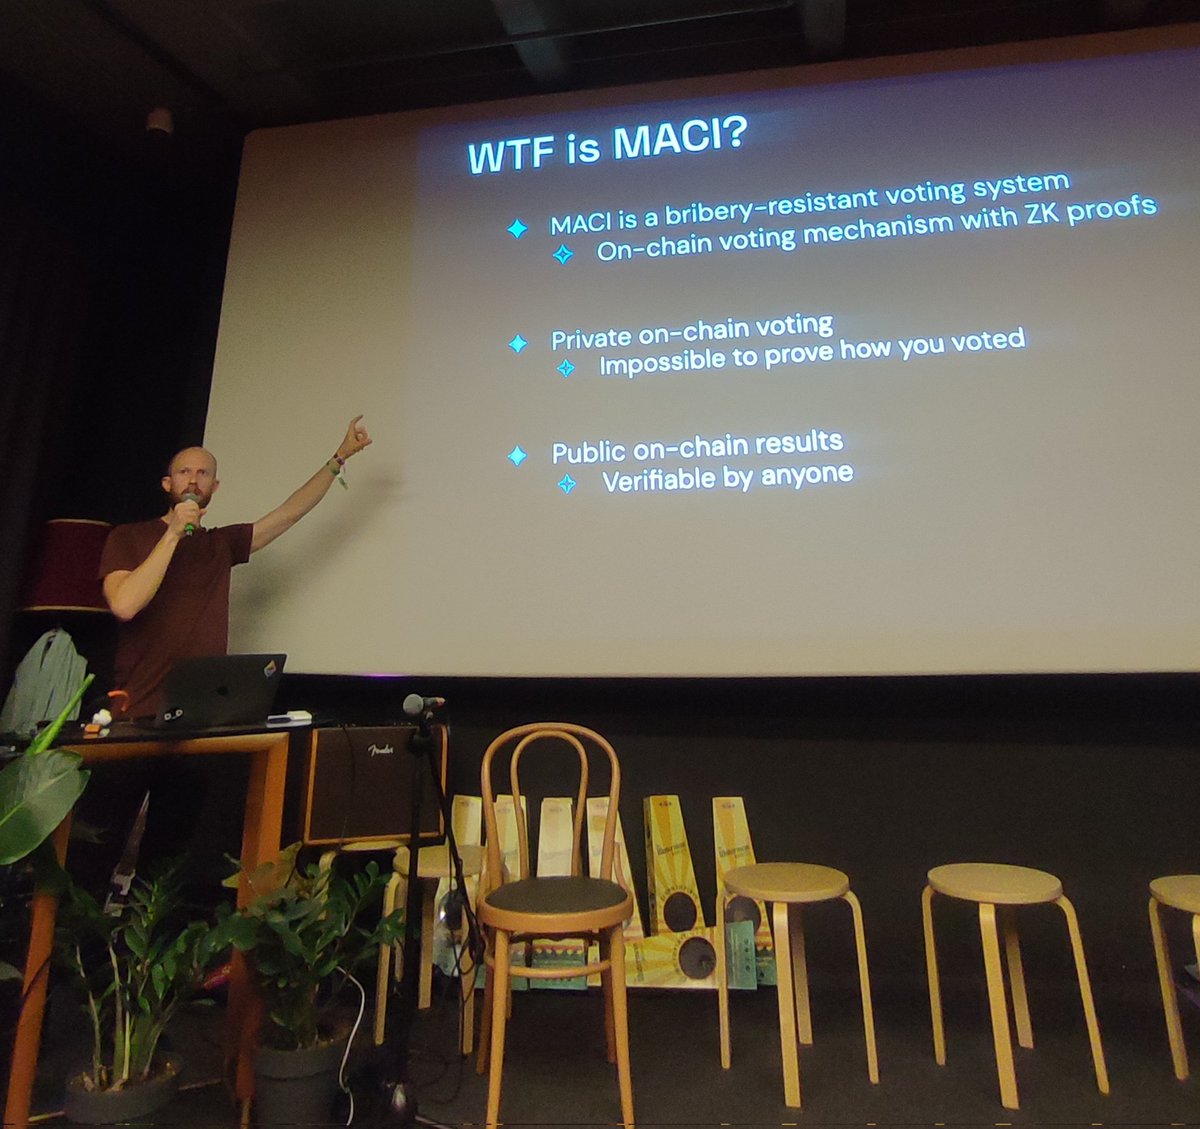 MACI tech stack:
- Circom circuits
- Solidity smart contracts
- TypeScript libraries

@samonchain we really liked your explanation on what MACI is 😁
📍 ZuConnect